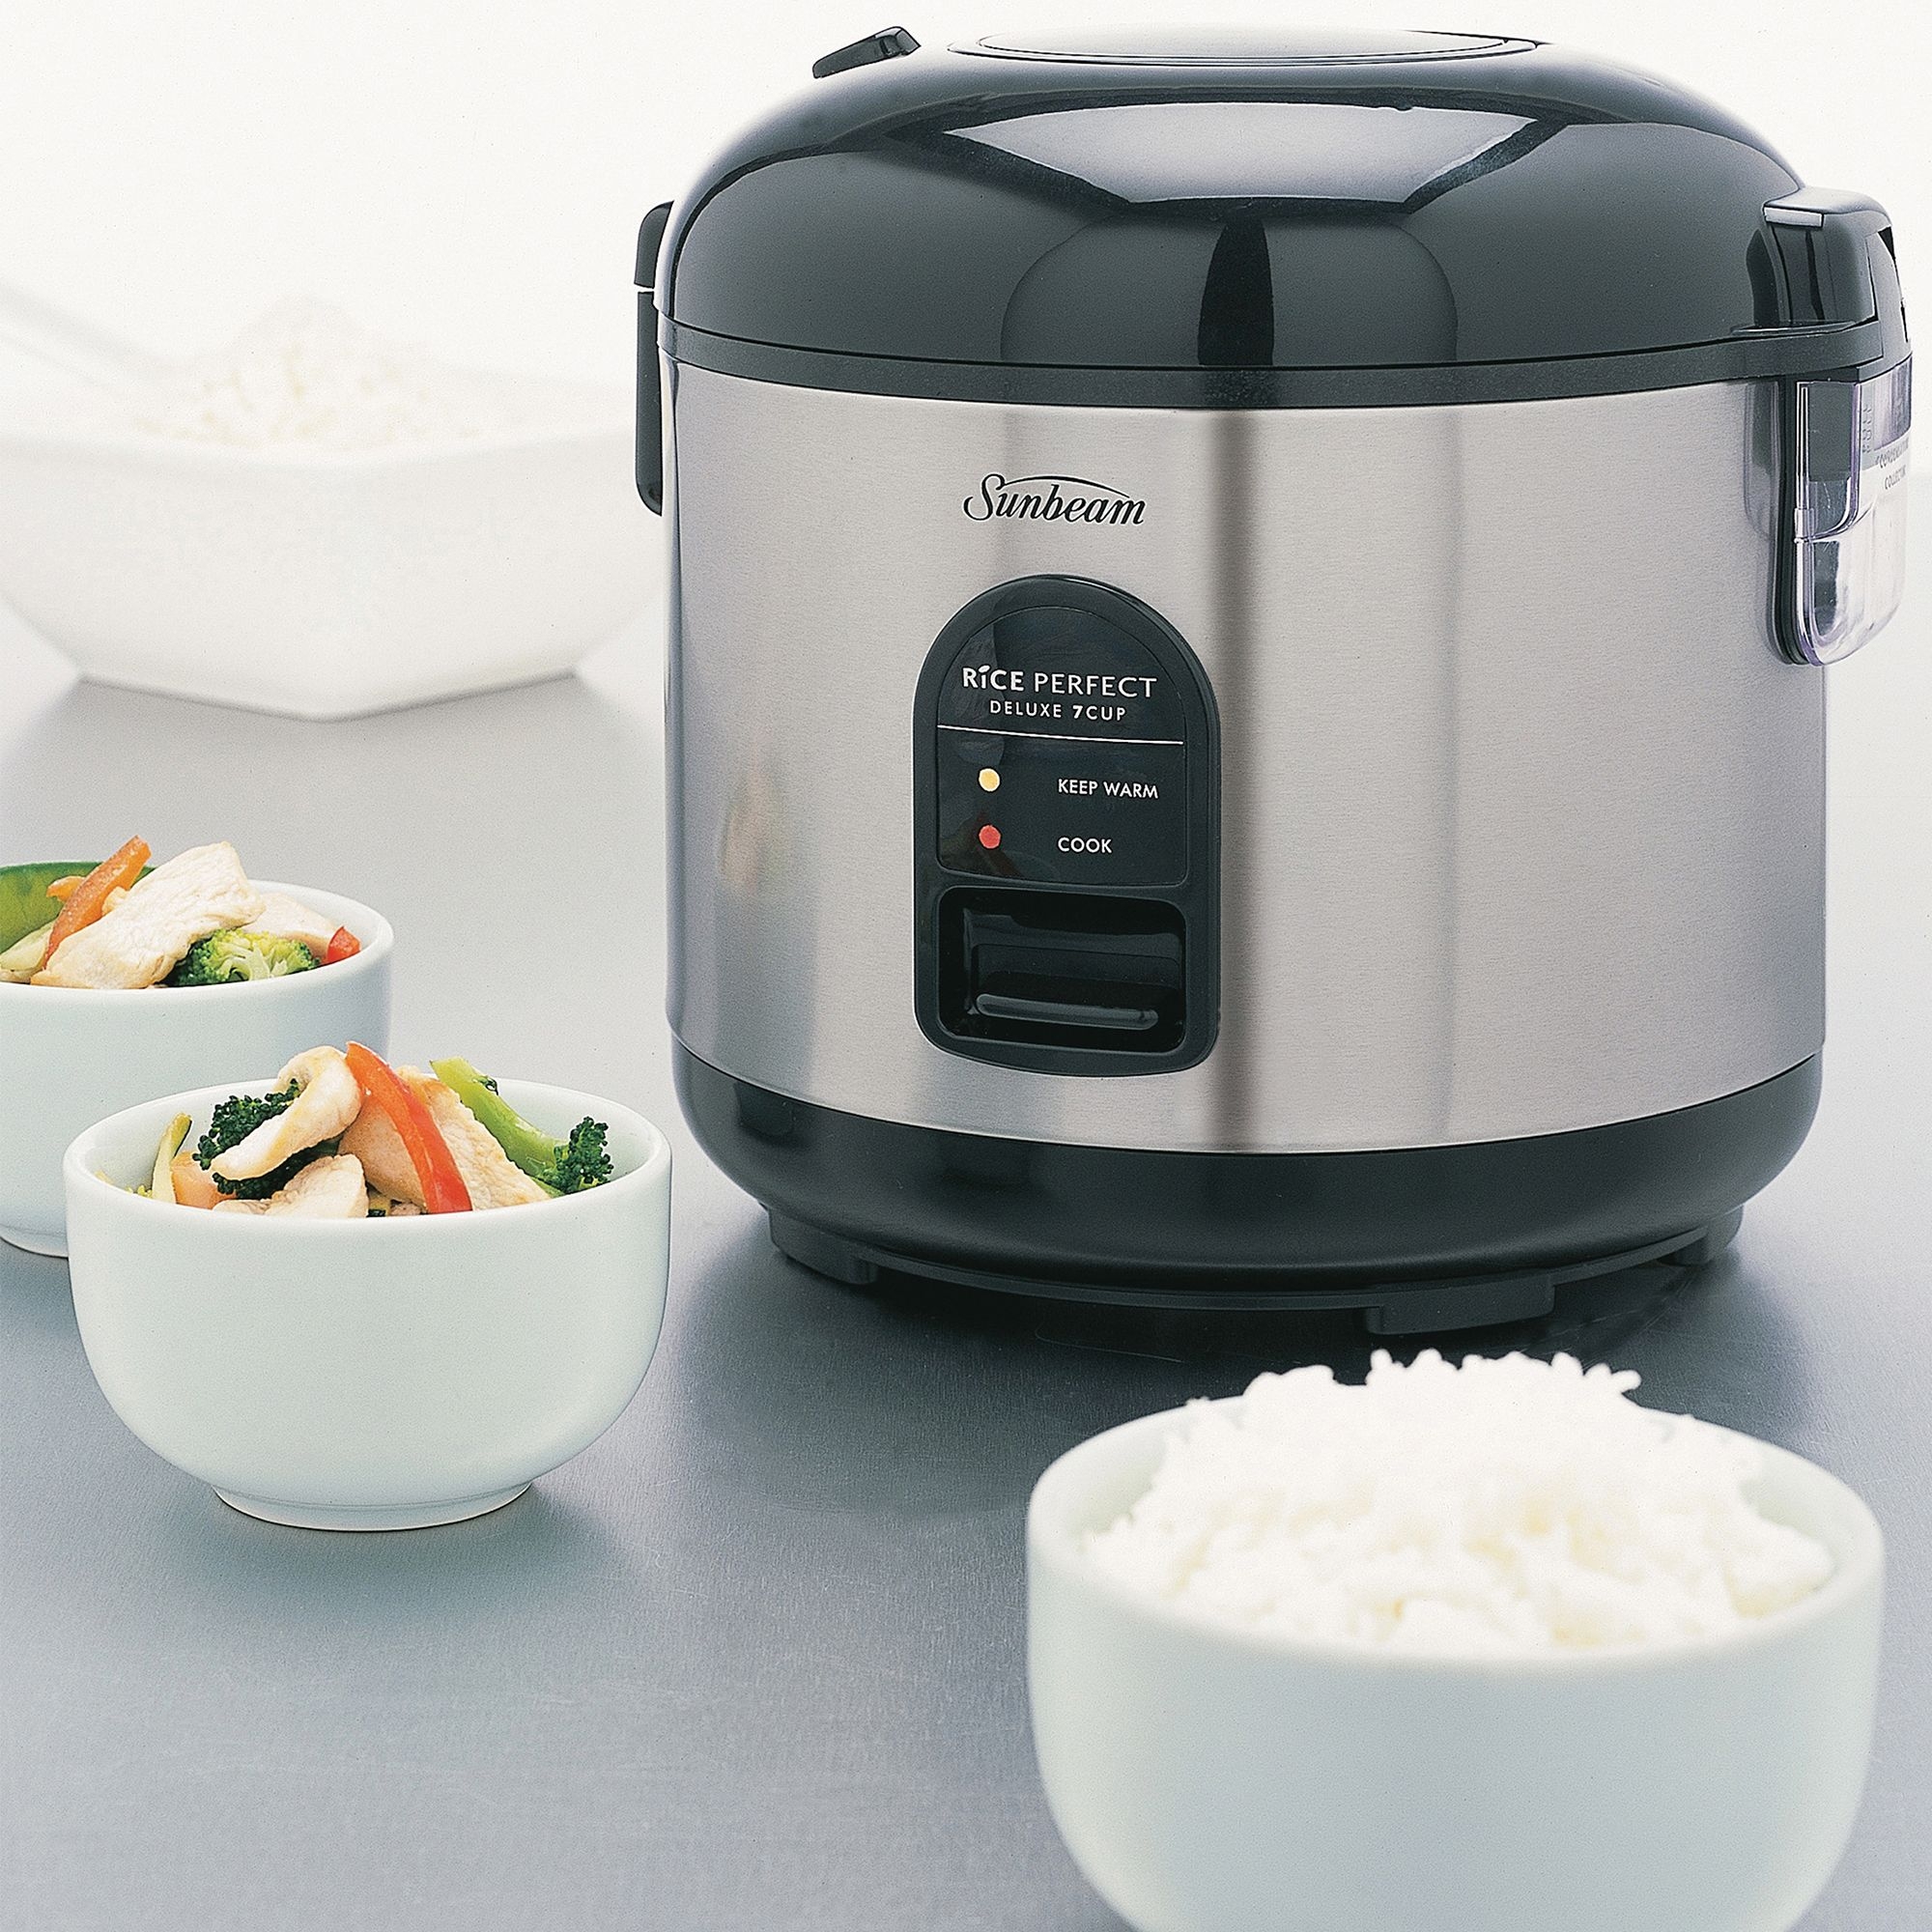 Sunbeam Rice Perfect Deluxe Rice Cooker and Steamer 7 Cup Image 2